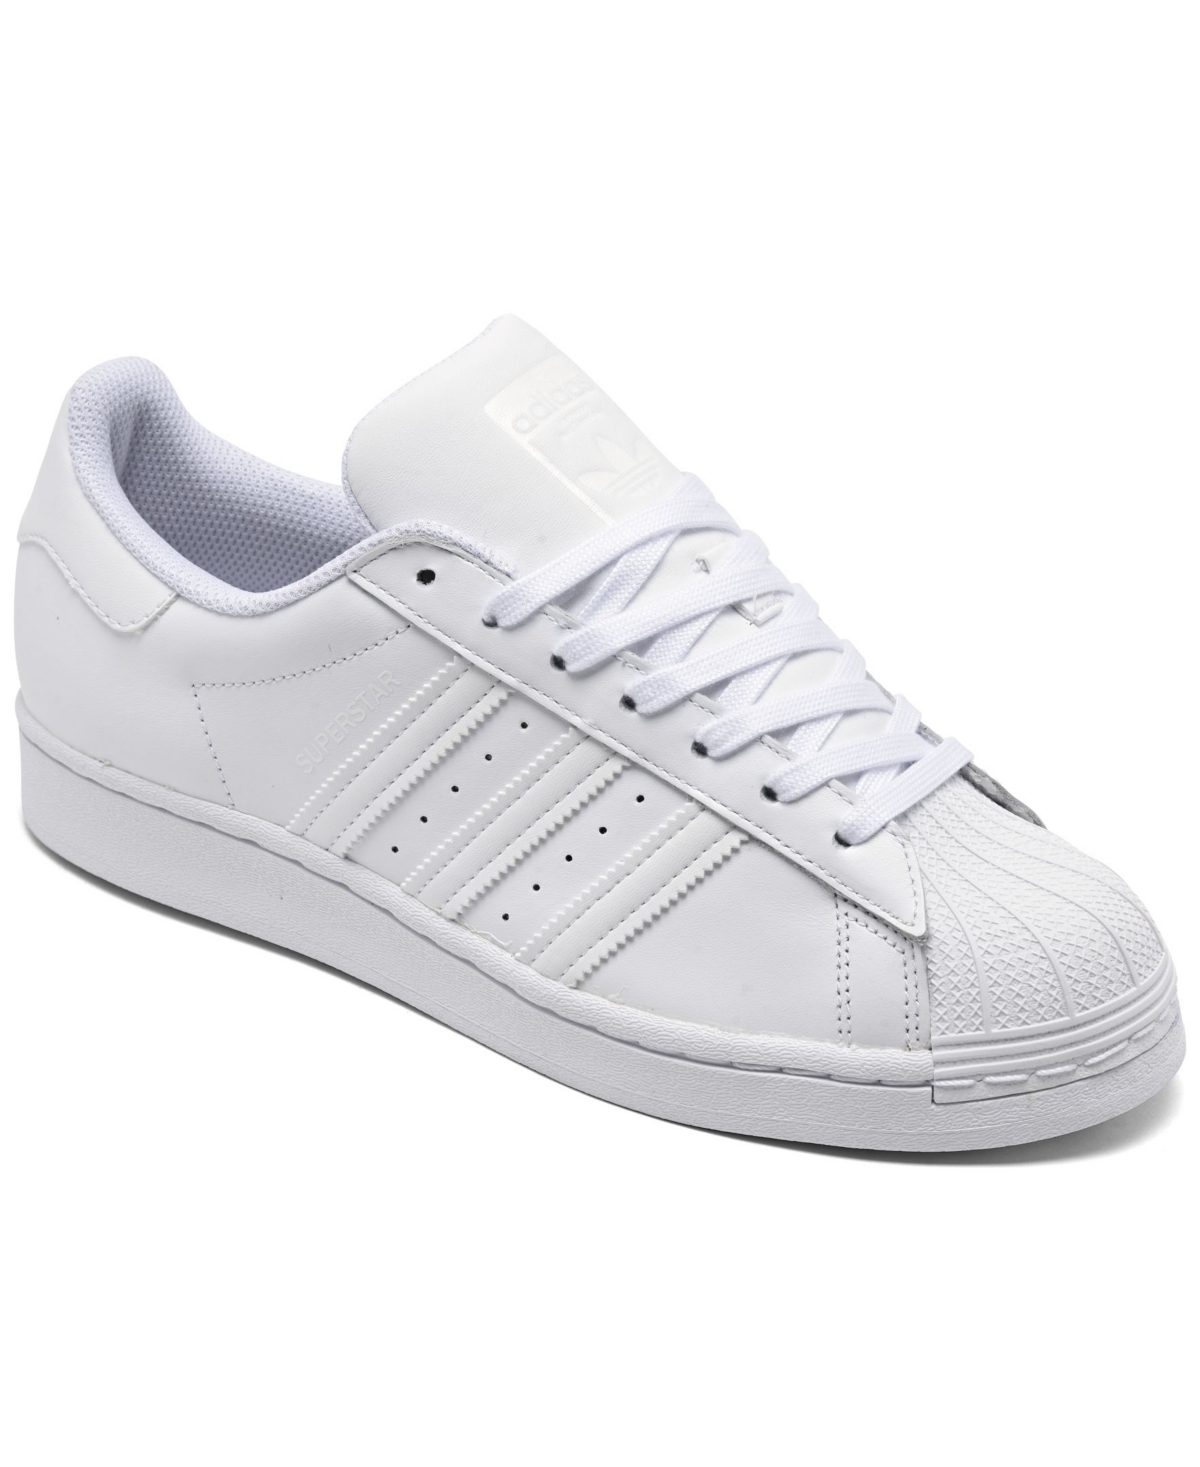 UPC 193105899614 product image for adidas Women's Originals Superstar Casual Sneakers from Finish Line | upcitemdb.com